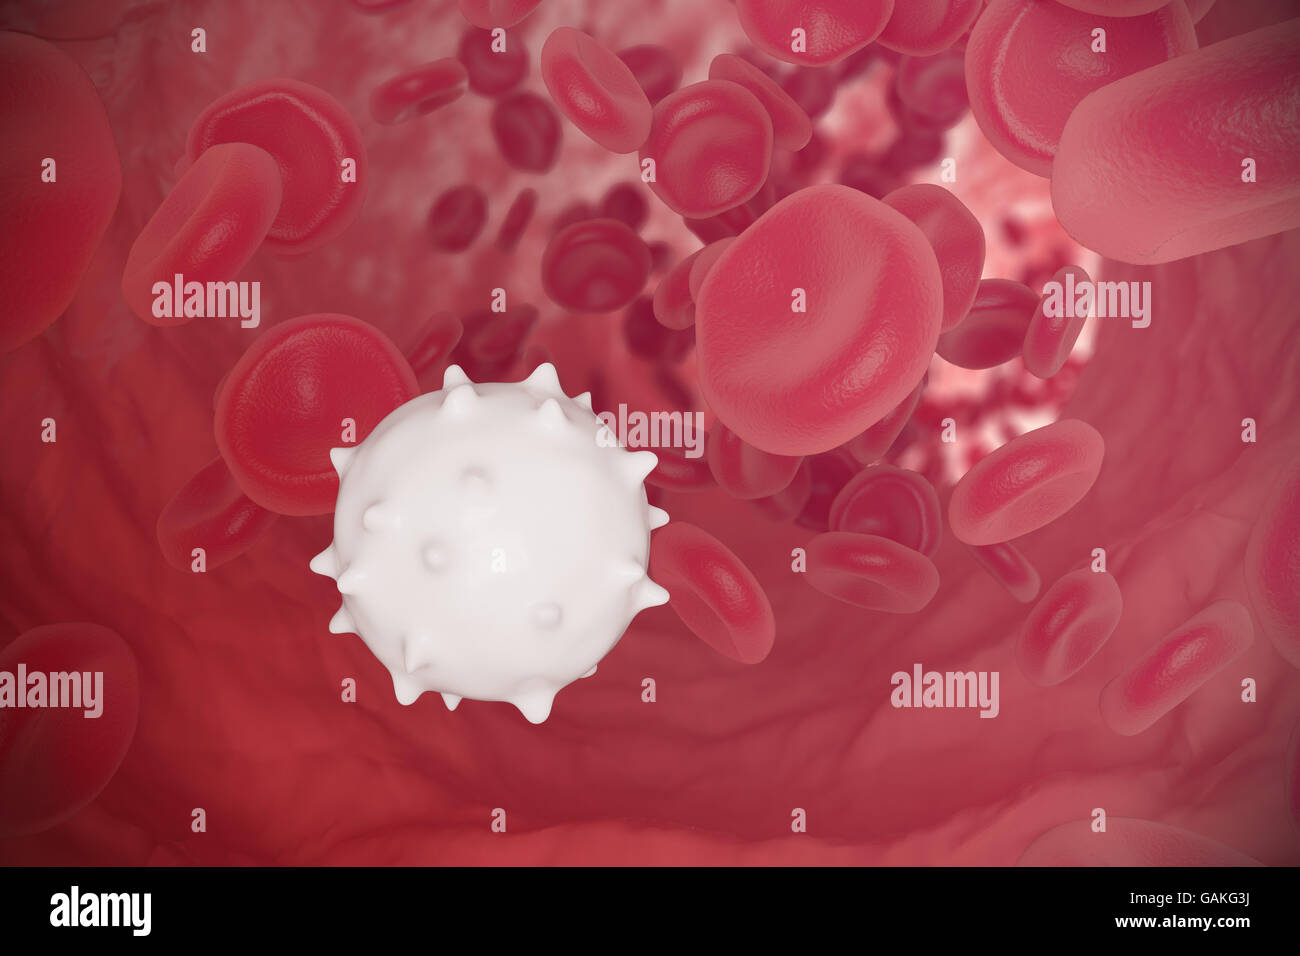 Red and white blood cells flowing through veins. Scientific  medical concept. 3d illustration Stock Photo